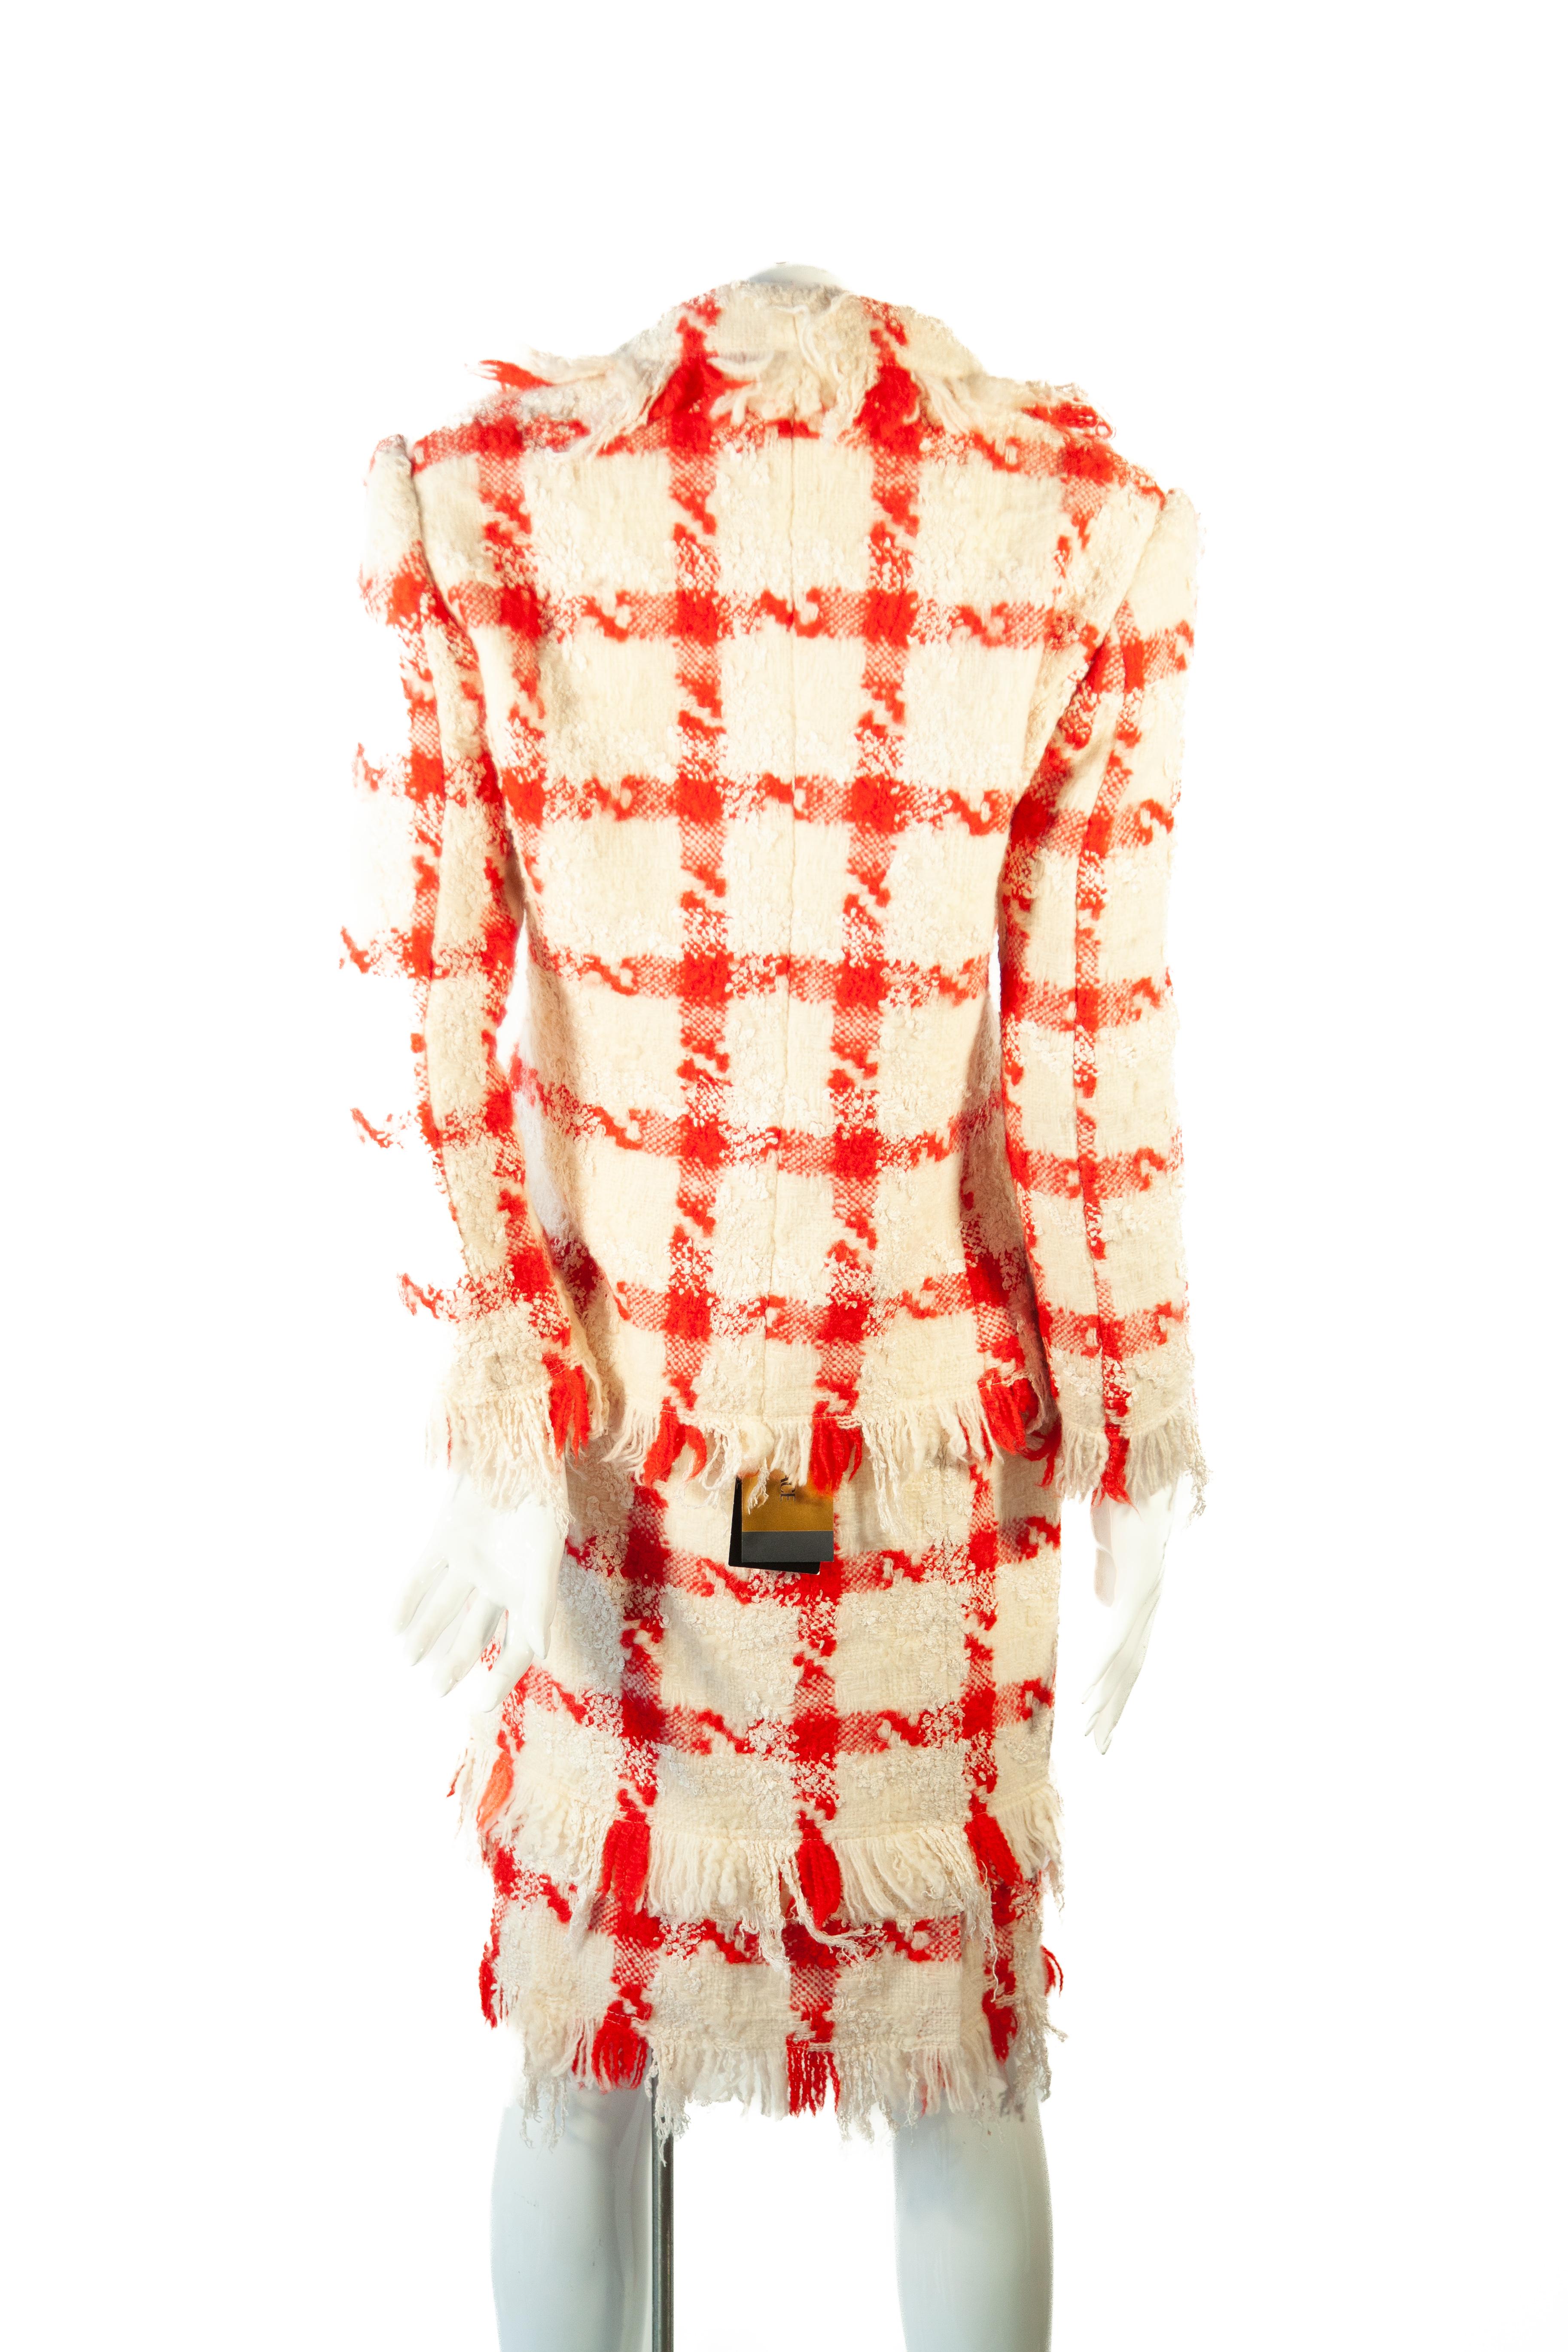 Versace by Donatella wool red and cream houndstooth ensemble, 2004

New with tags. 

Size 42, US 6